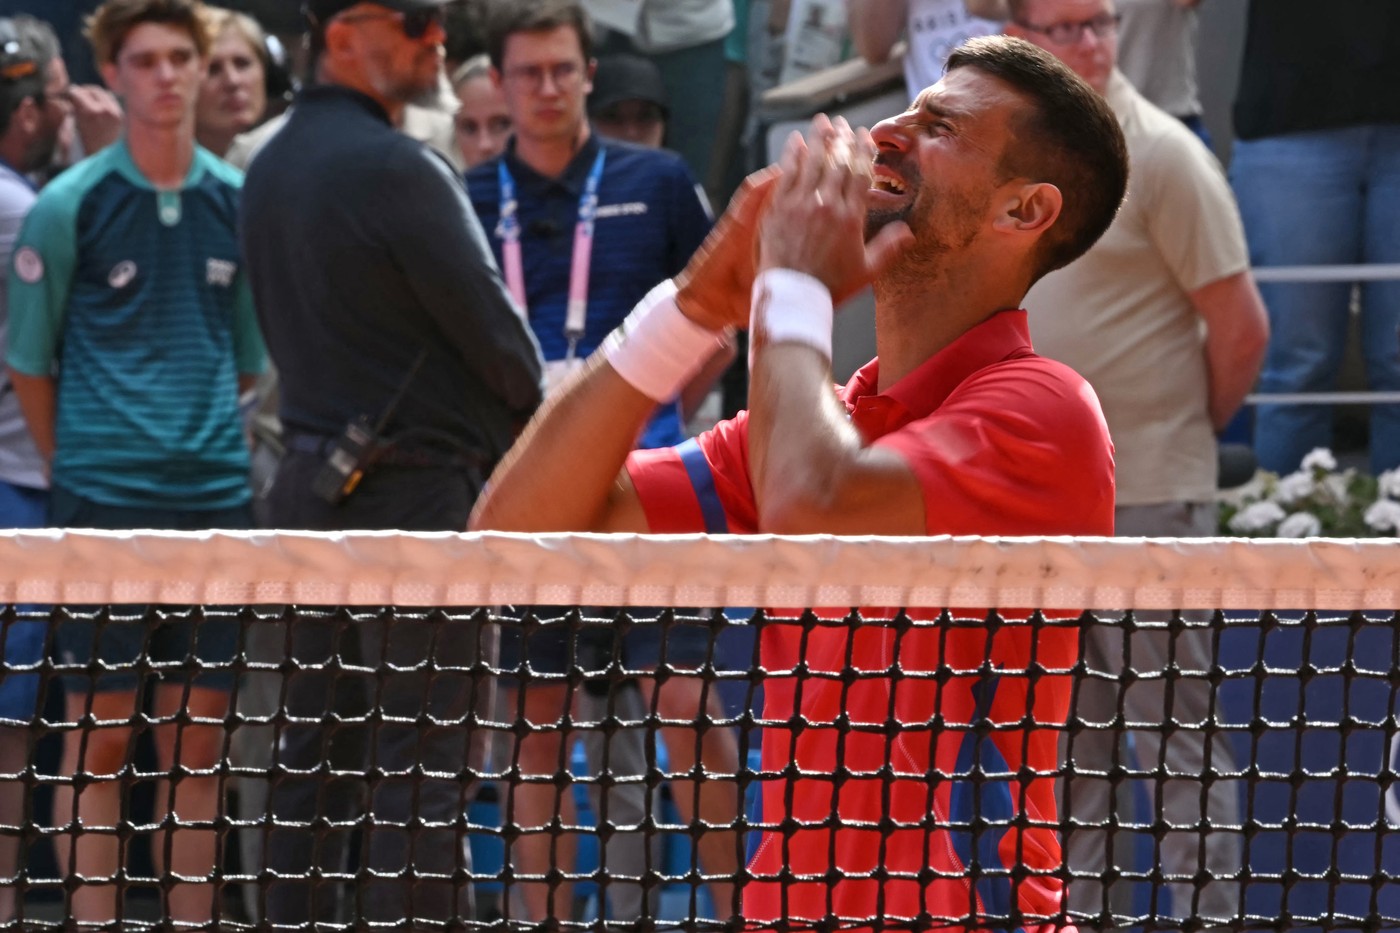 Serbia's Novak Djokovic reacts to beating Spain's Carlos Alcaraz in their men's singles final tennis match on Court Philippe-Chatrier at the Roland-Garros Stadium during the Paris 2024 Olympic Games, in Paris on August 4, 2024.,Image: 895899804, License: Rights-managed, Restrictions: , Model Release: no